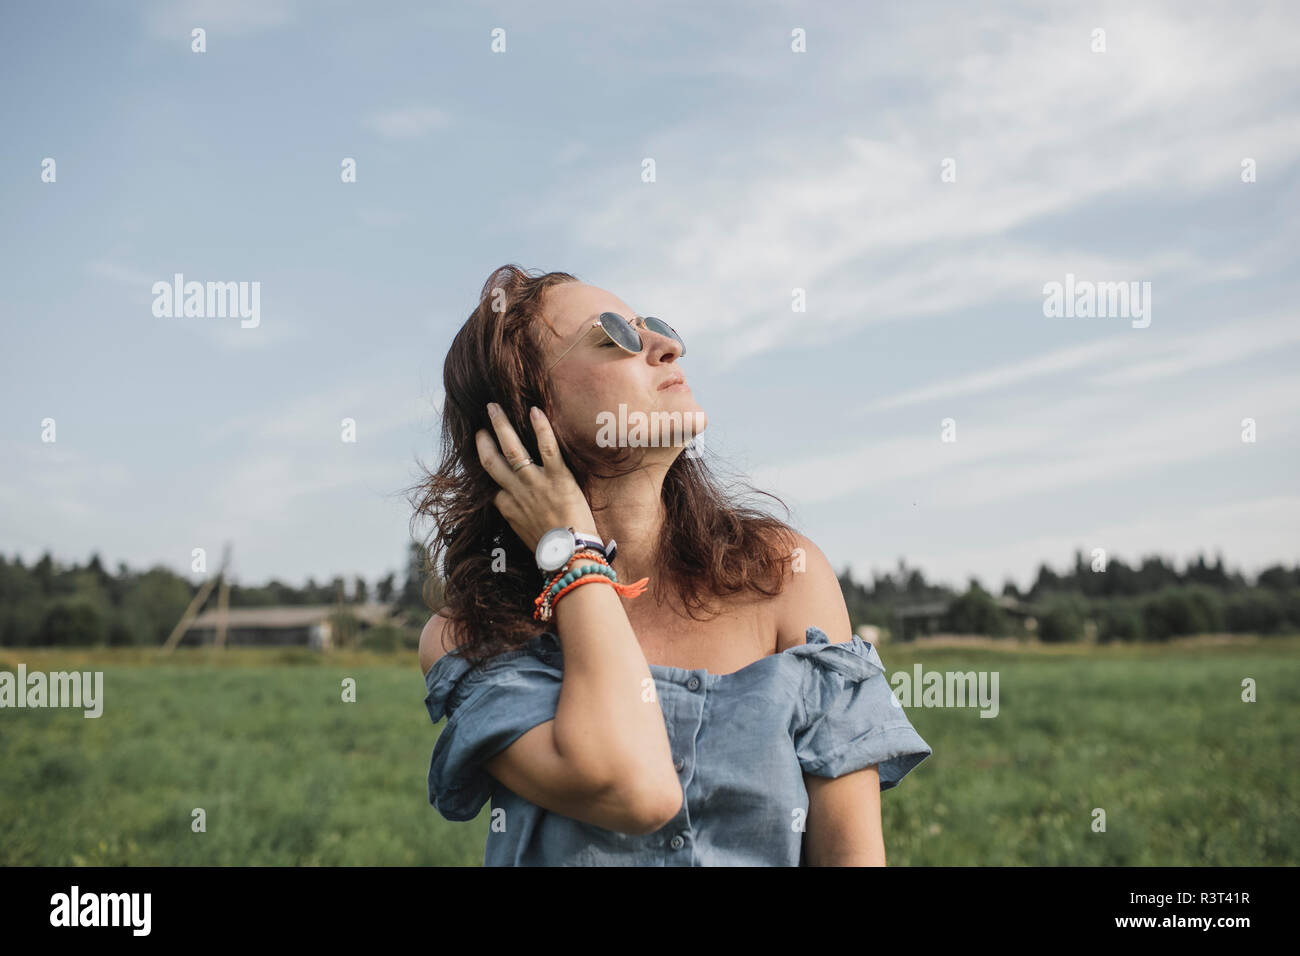 Relaxed woman on a rural field Stock Photo